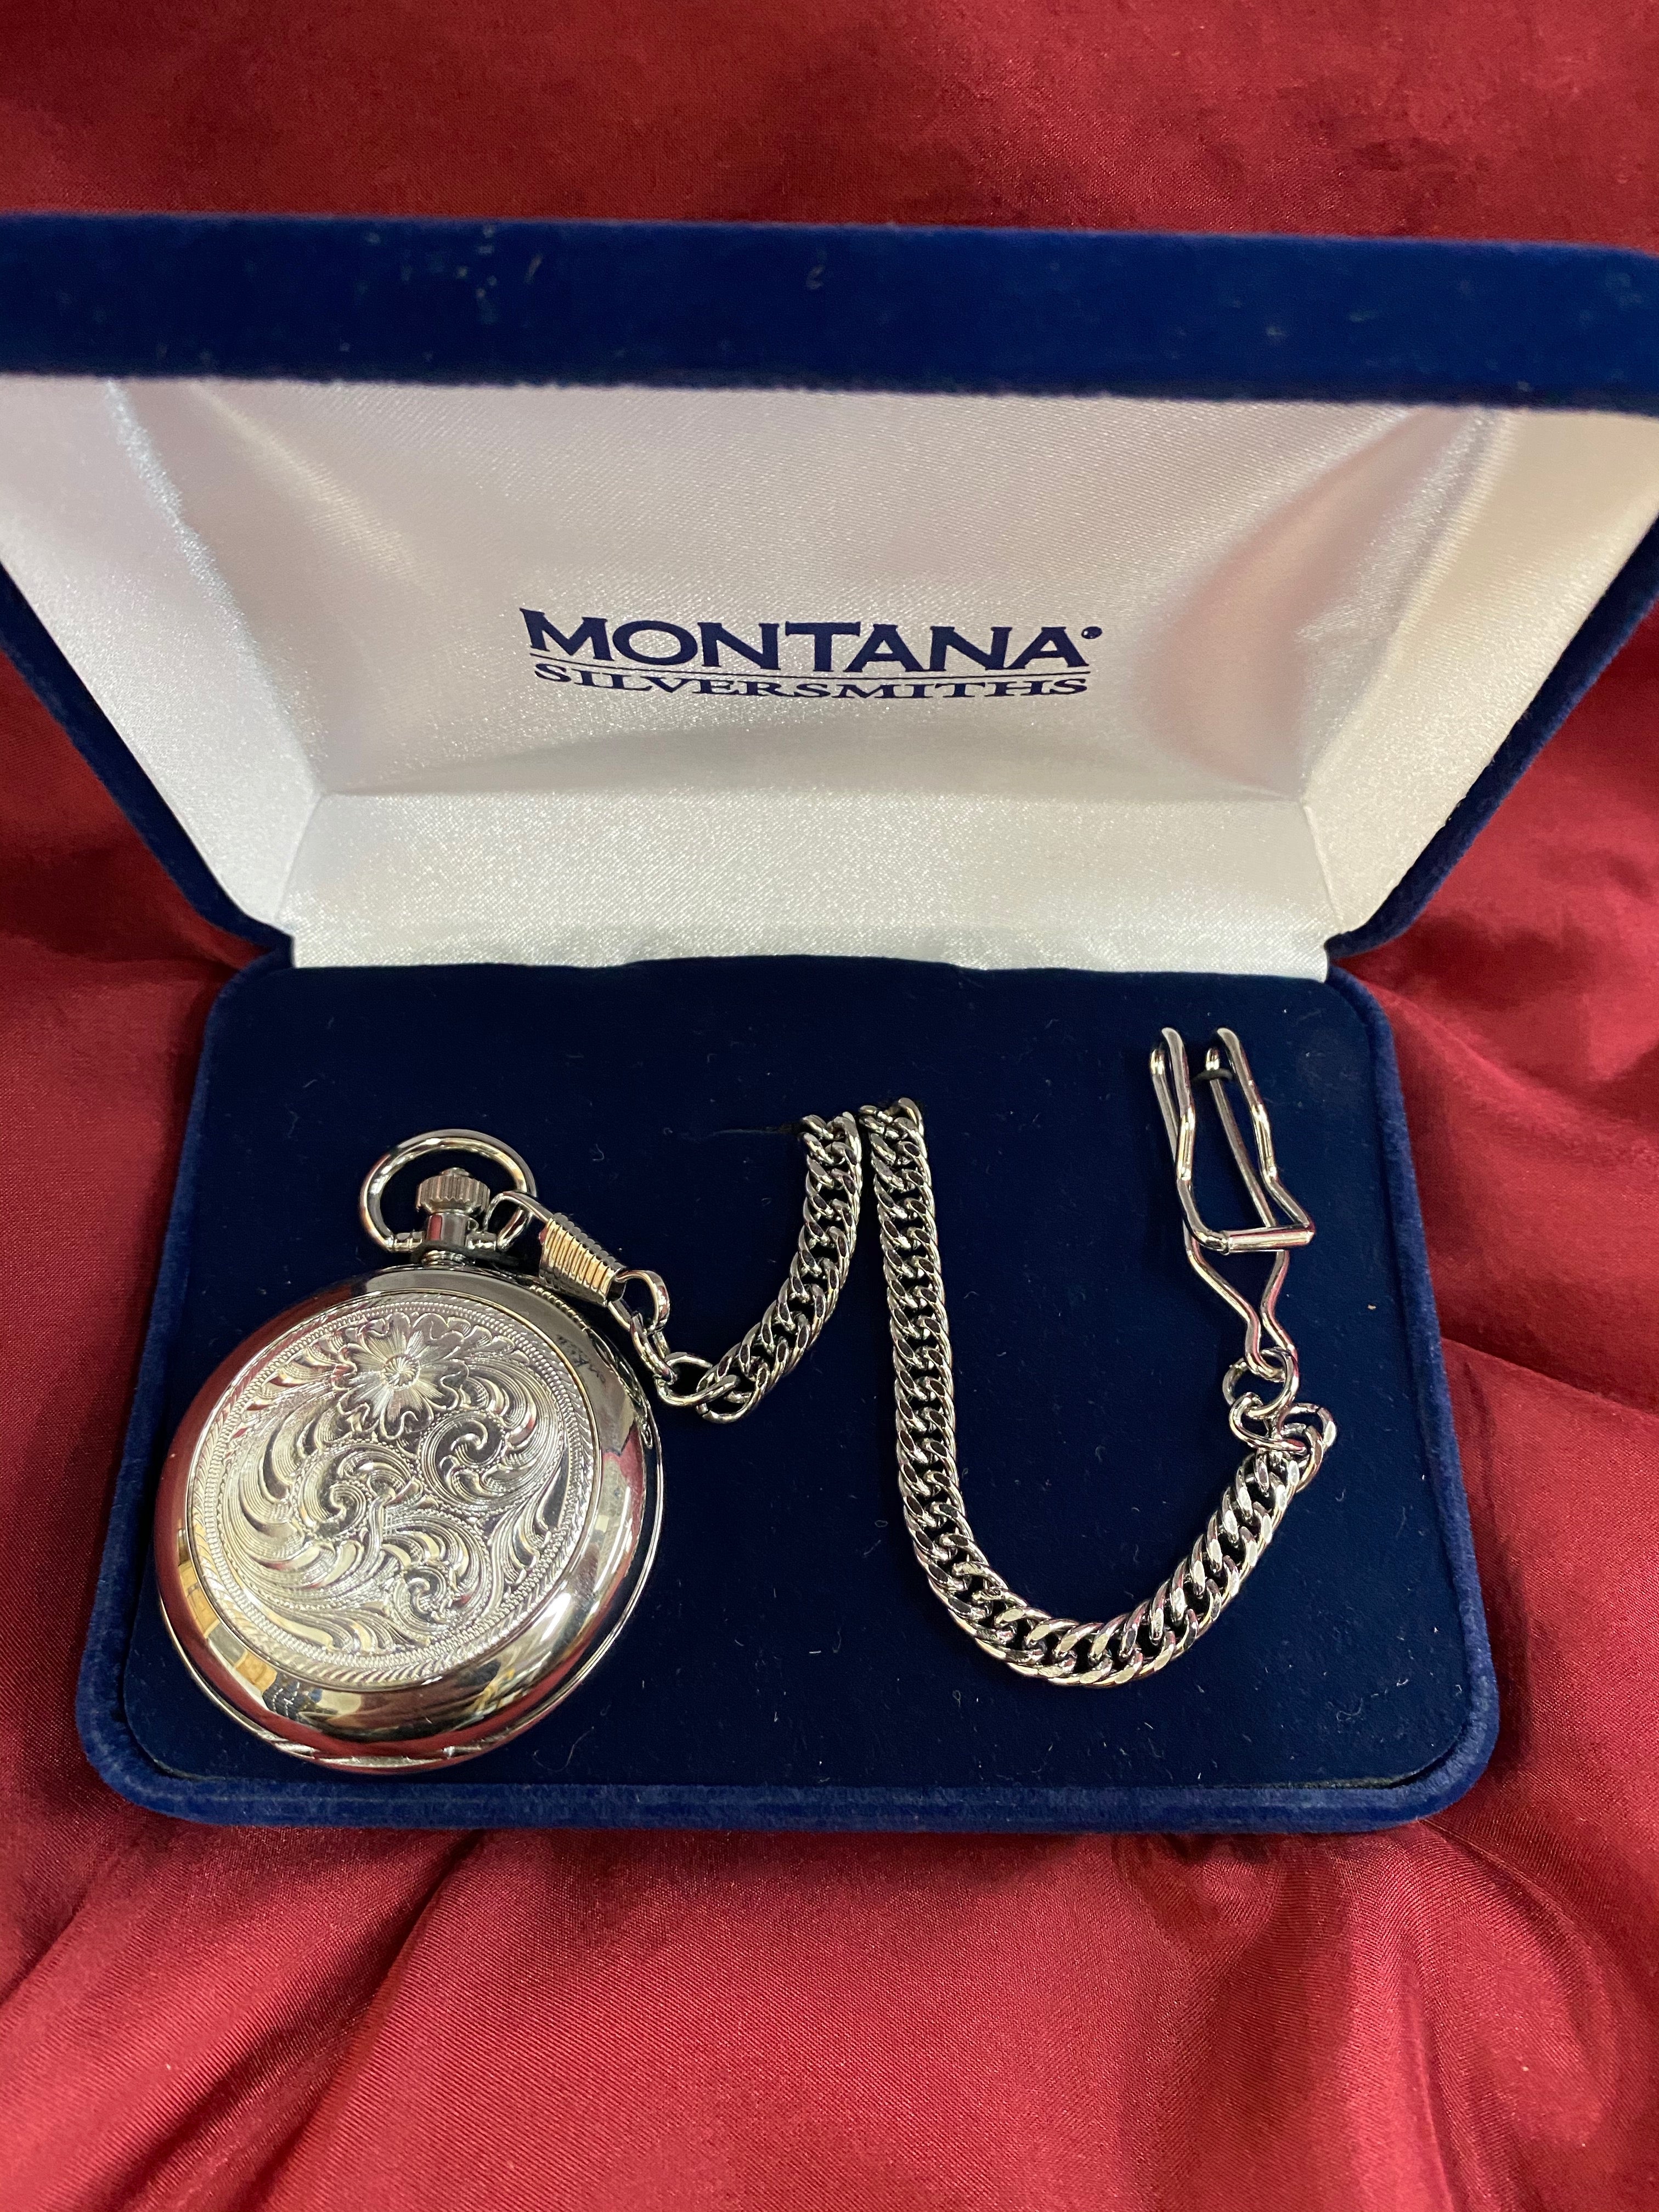 ENGRAVED POCKET WATCH